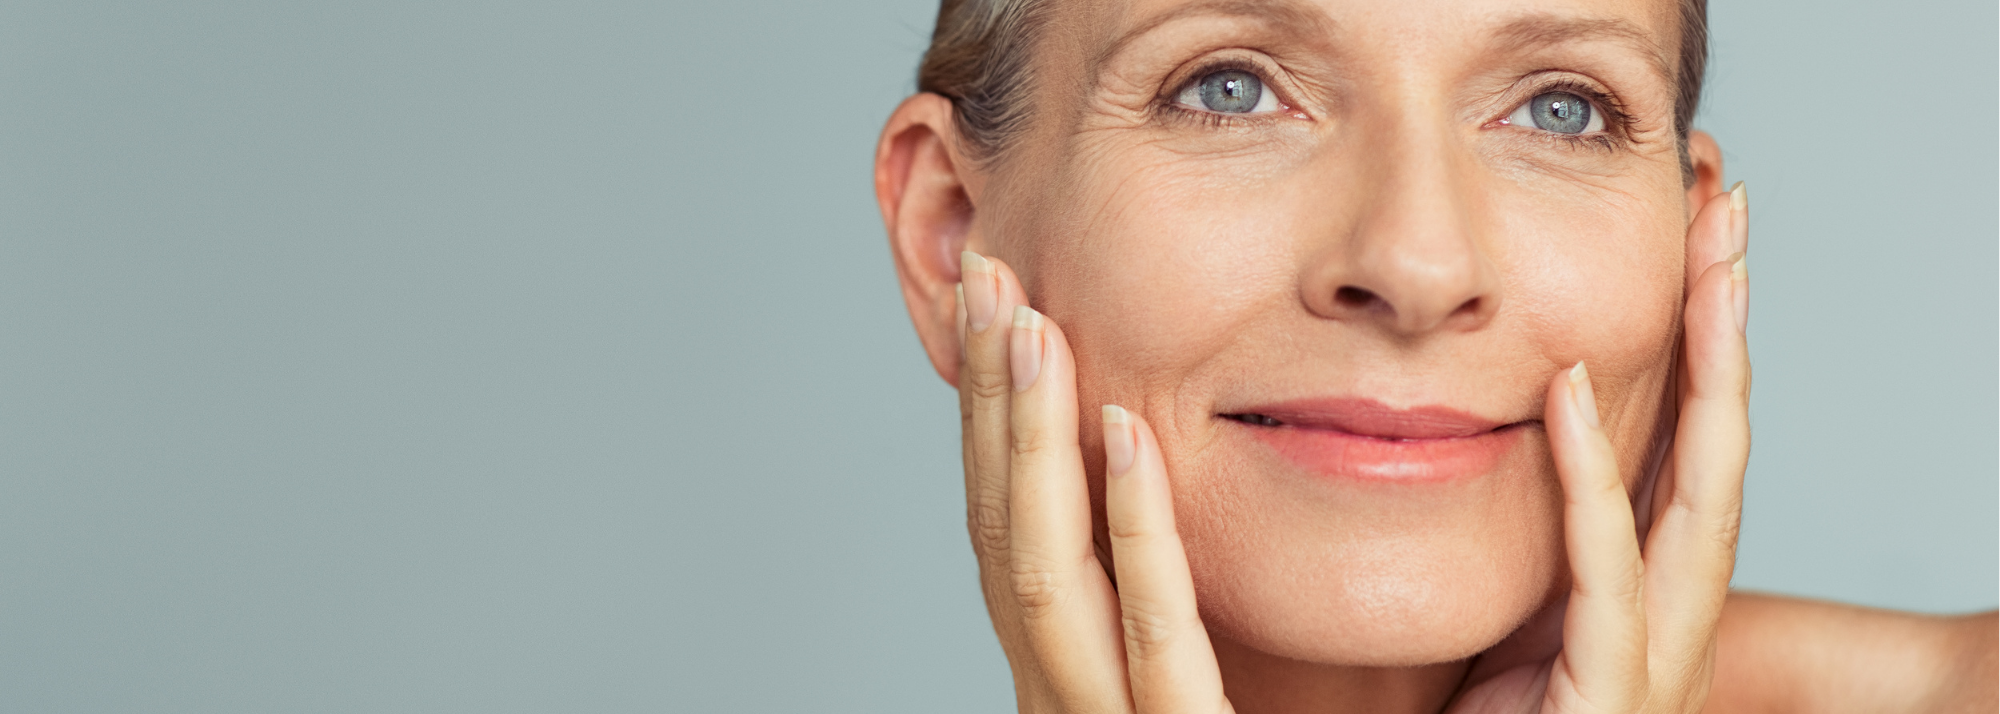 Skin care after 45 years of age